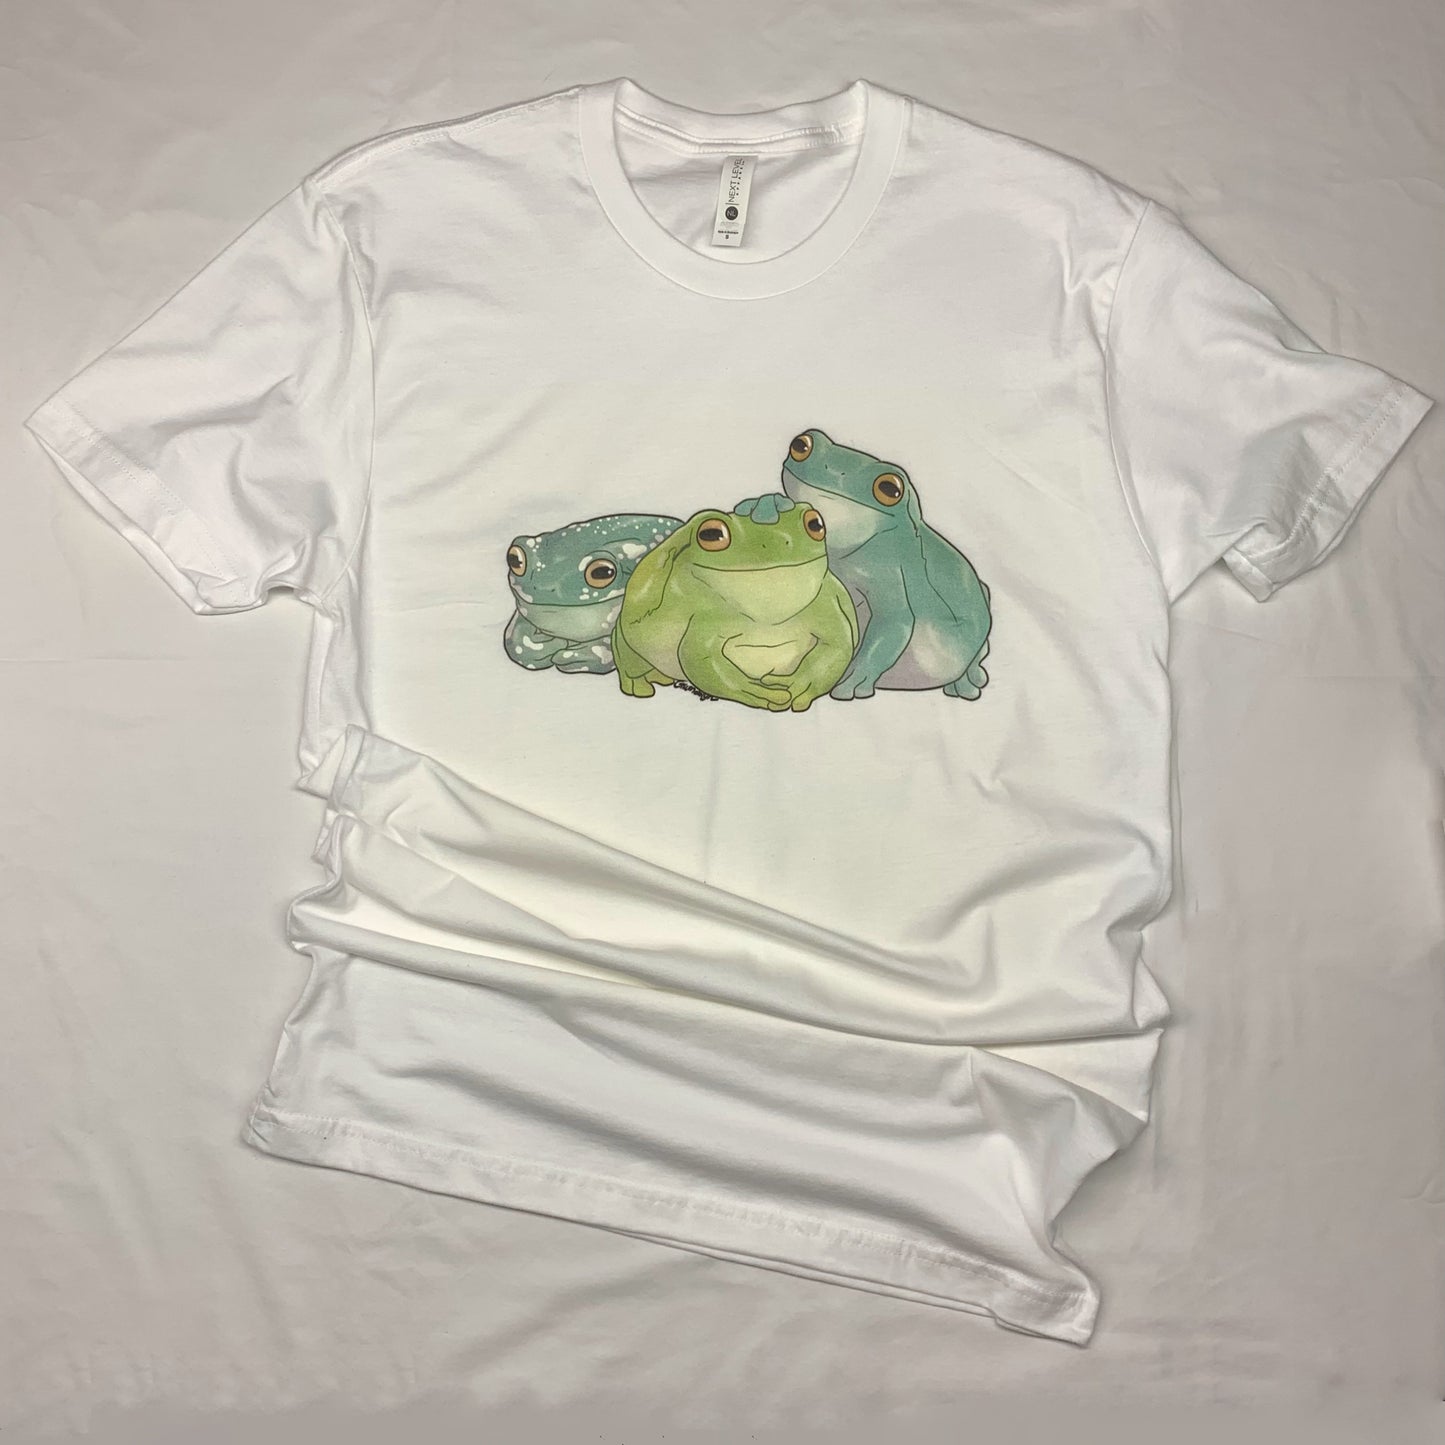 A white, short-sleeve t-shirt with an illustration of three white's tree frogs, each a different color variation, sitting side by side